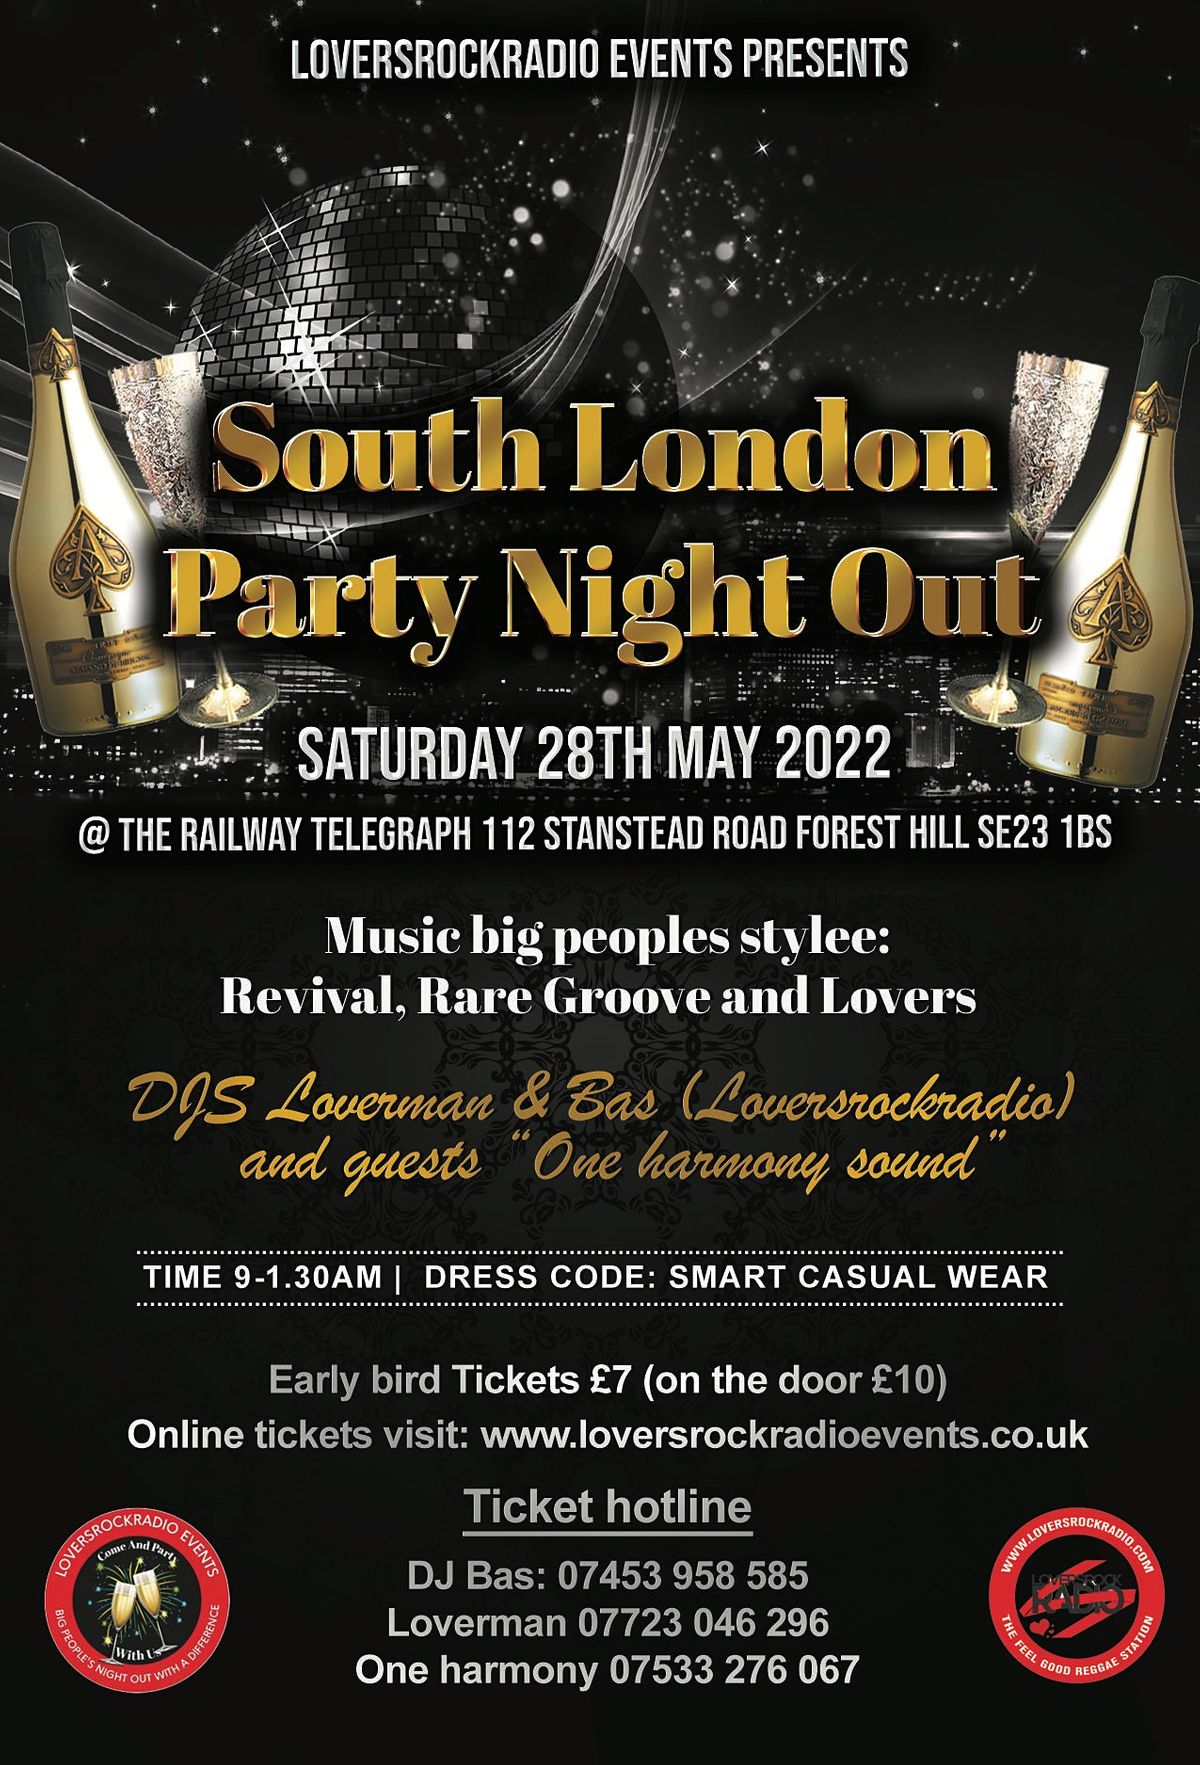 South London's  Party Night Out